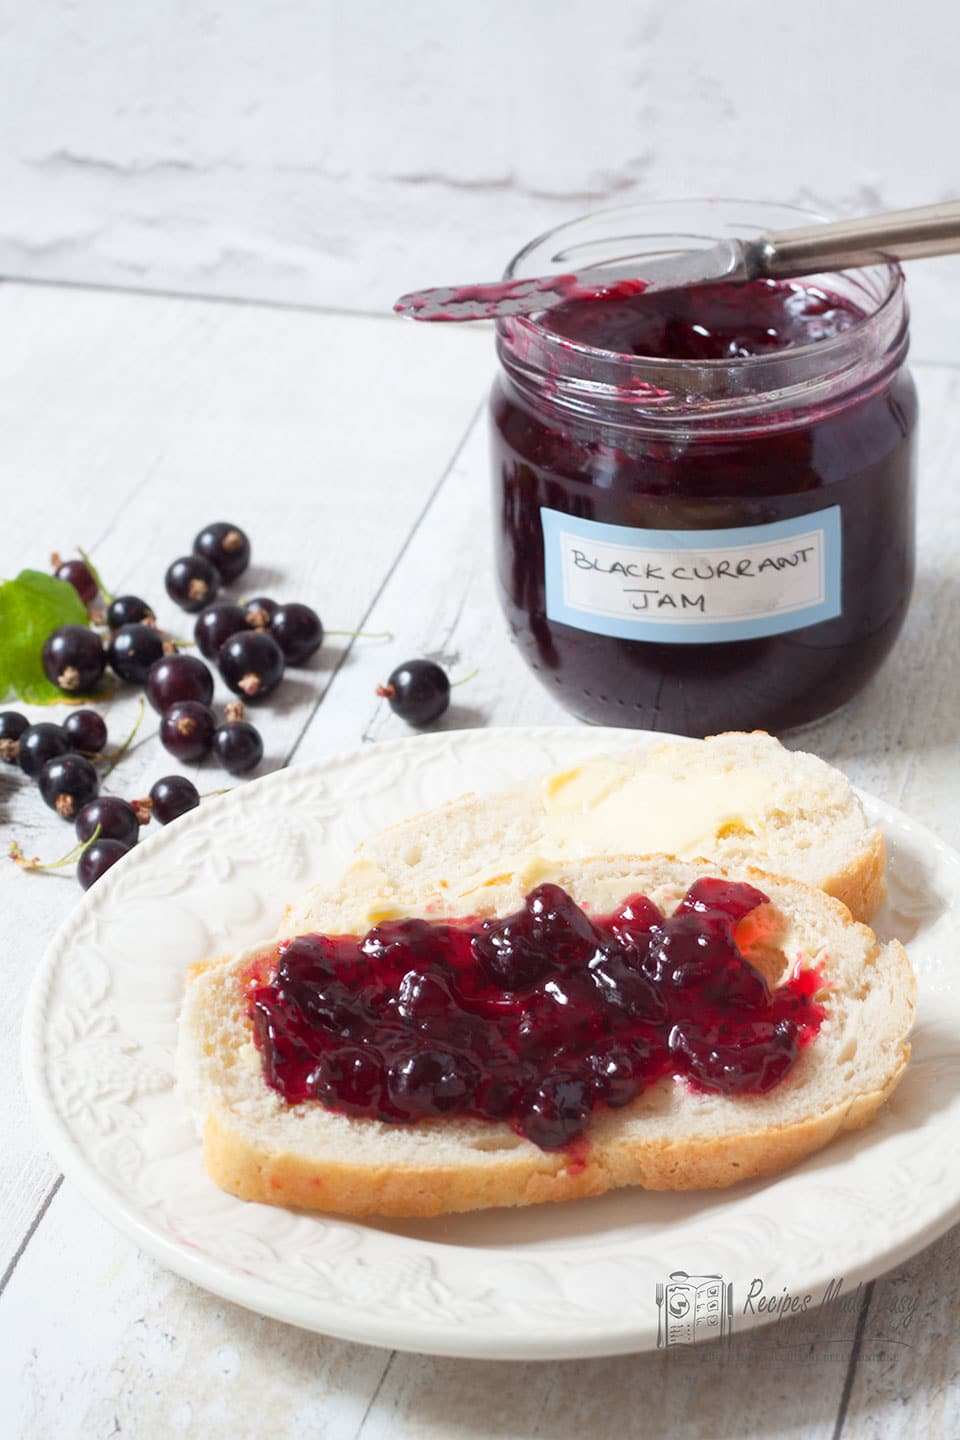 blackcurrant jam spread on bread with jar in background